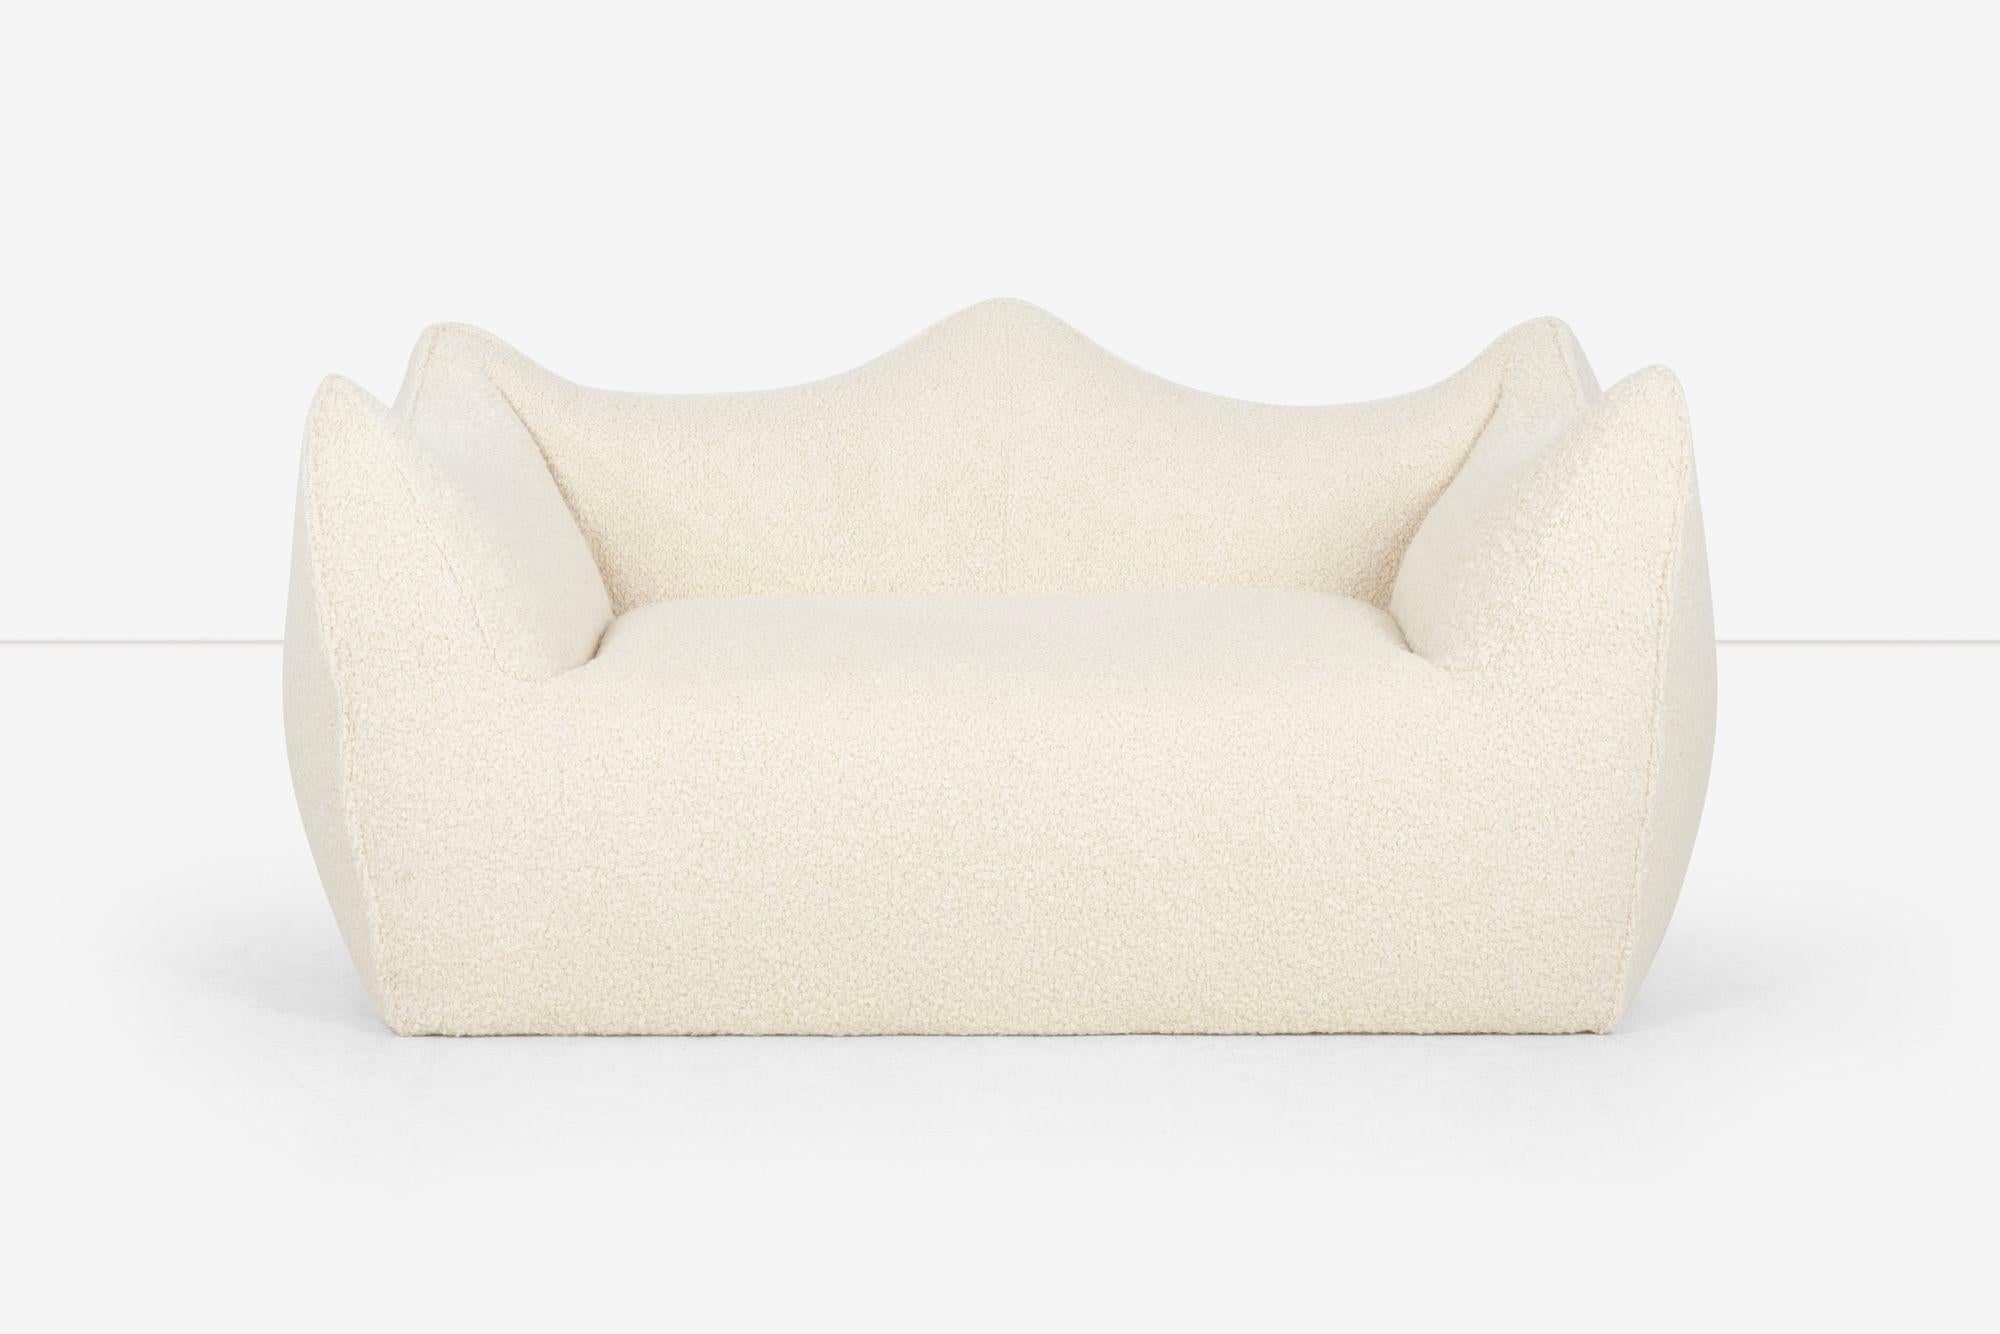 Le Bambole Sofa by Mario Bellini for B and B Italia, reupholstered with Great
Plains Boucle.
Dimensions:
Height is 29.50
The low part of the back is 25.50